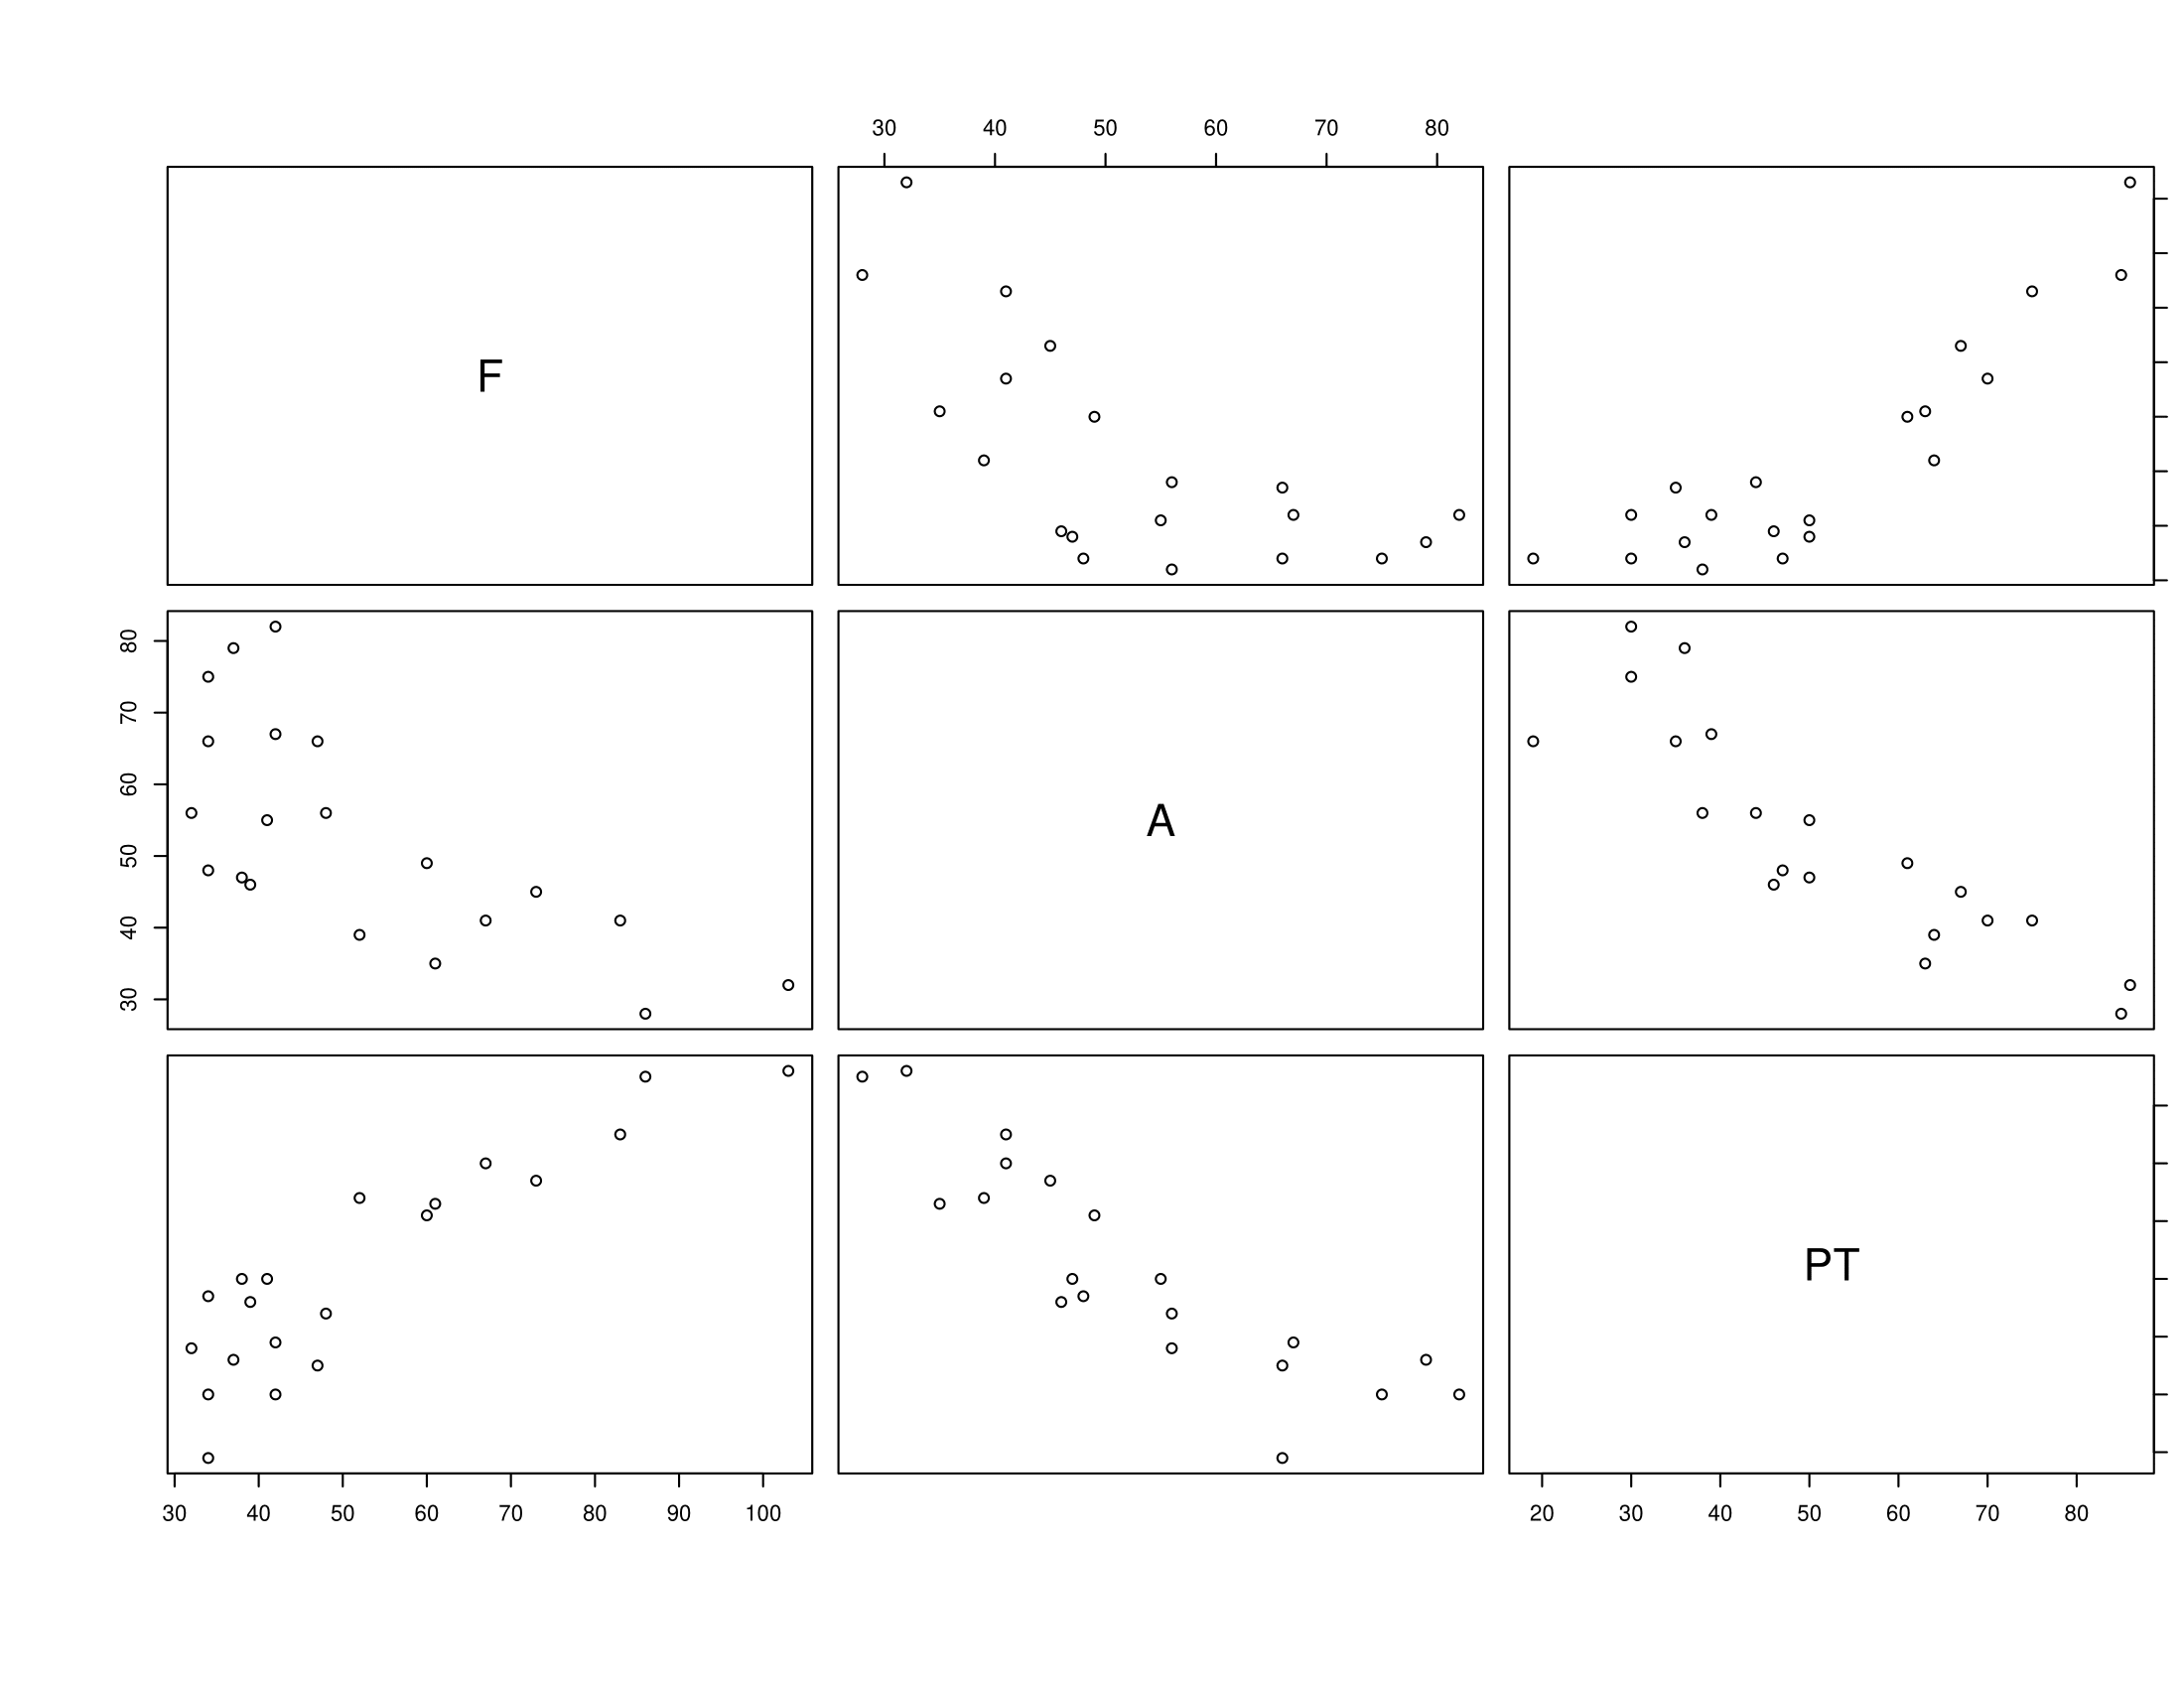 Scatter plots of goals for (F), goals against (A) and points (PT) for a recent Premier League Season